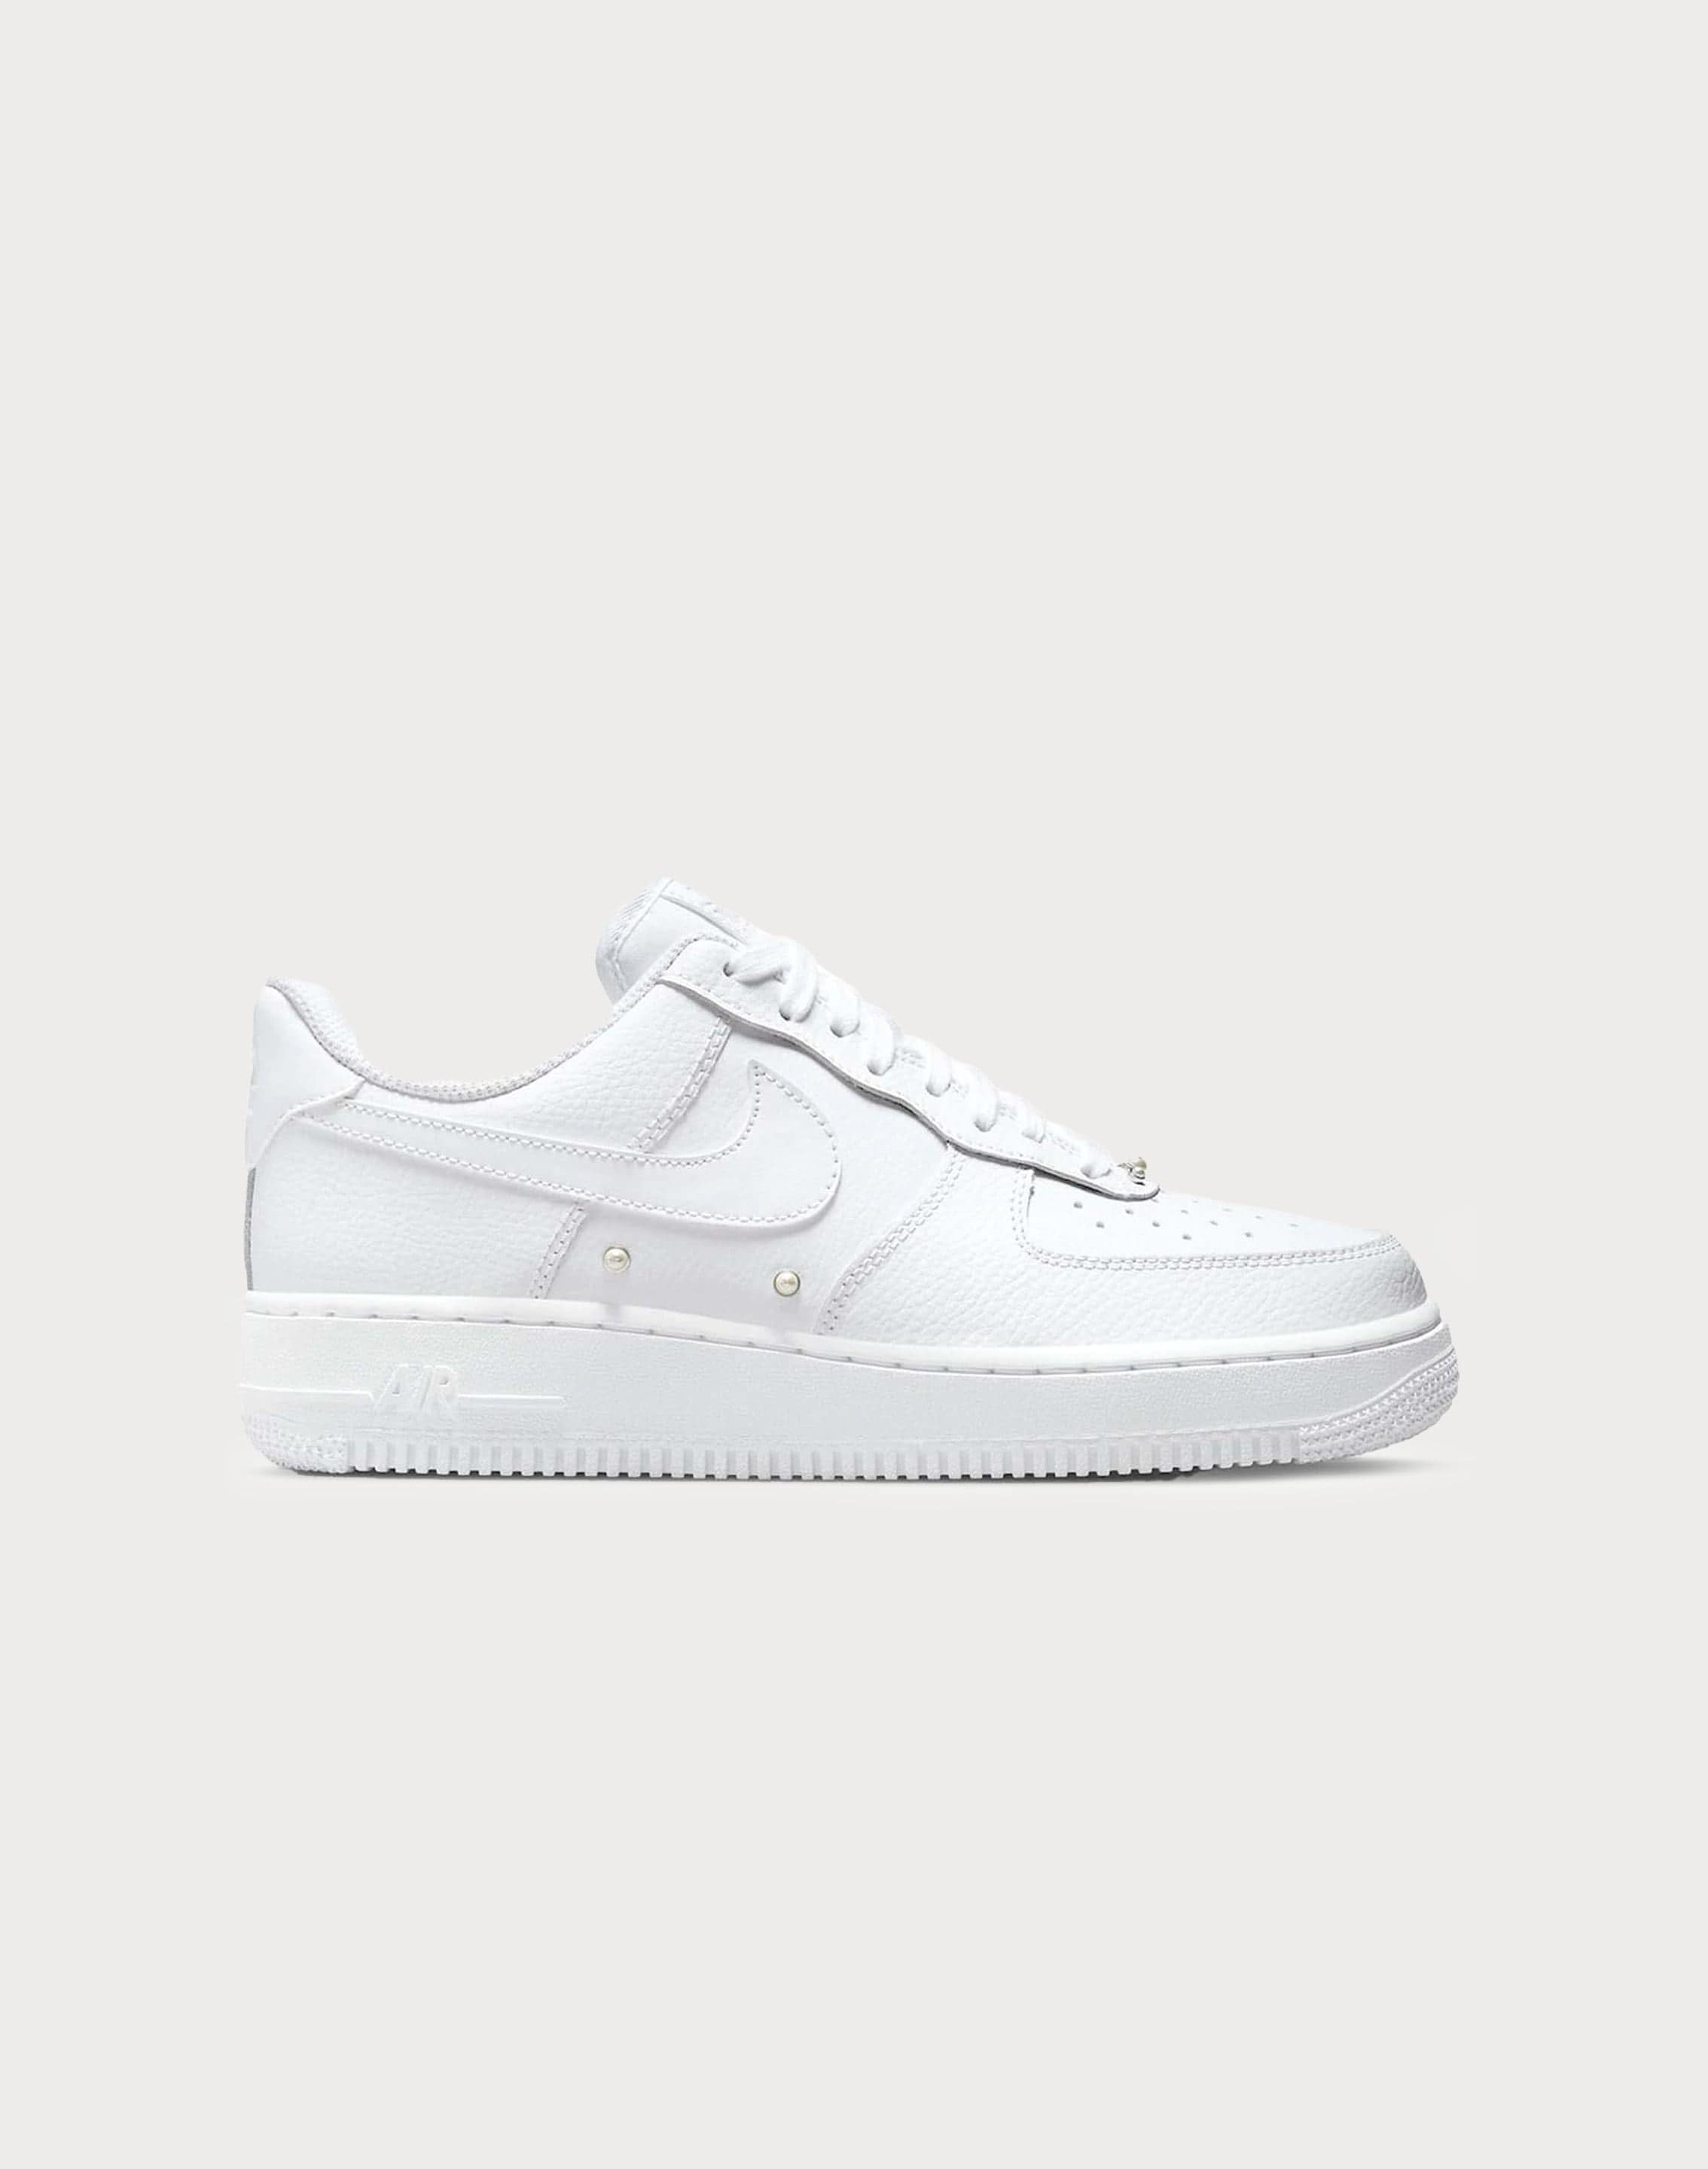 BUY Nike Air Force 1 Low 07 White